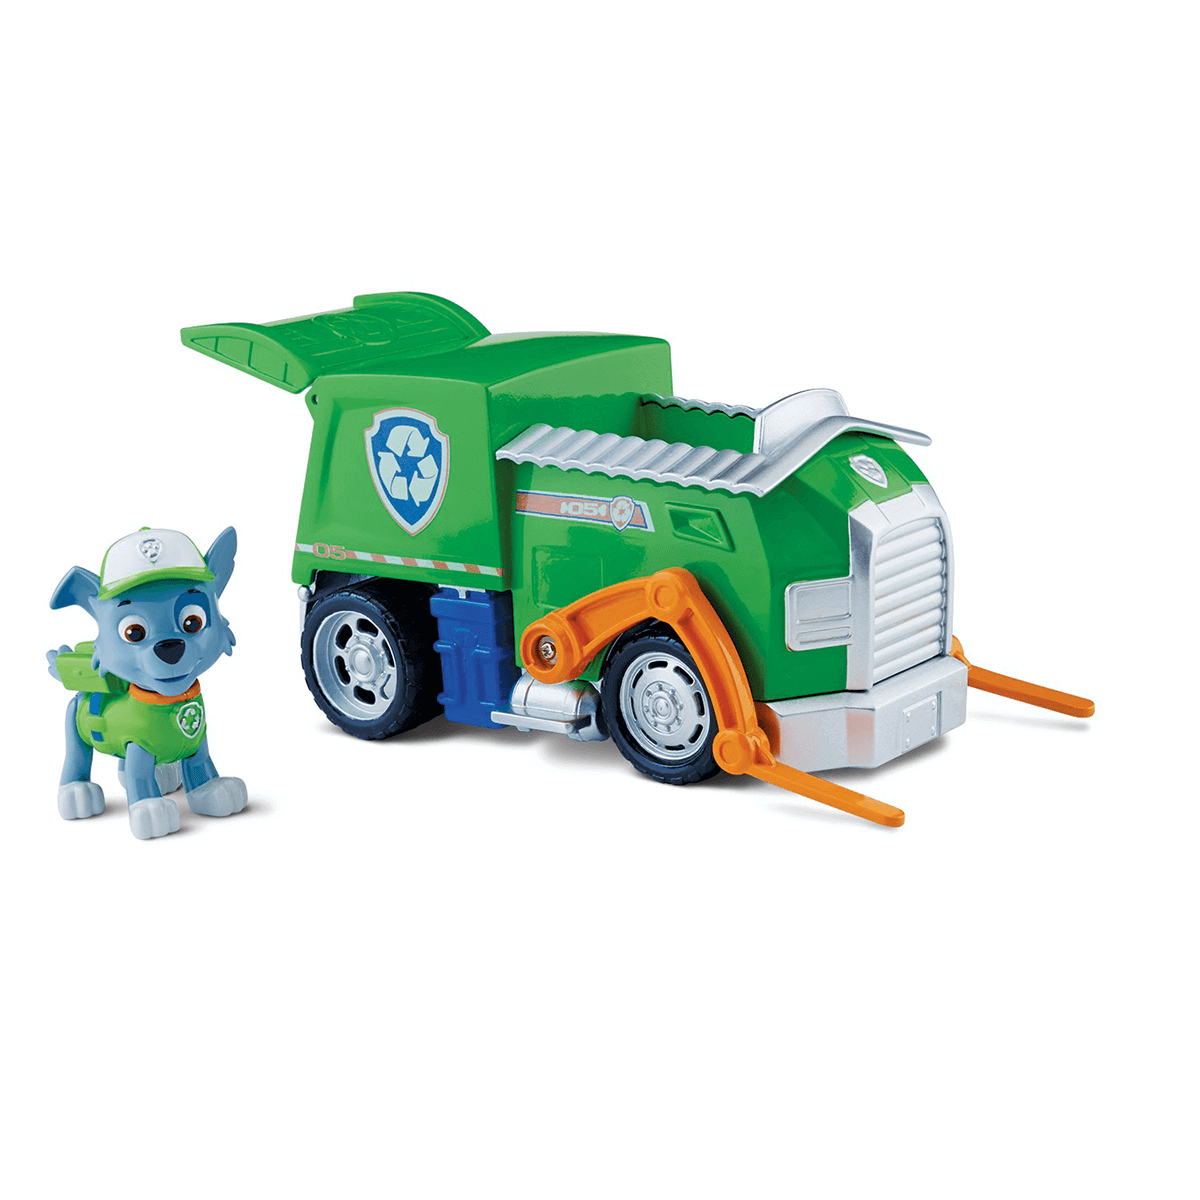  Paw Patrol Recycling Truck with Rocky